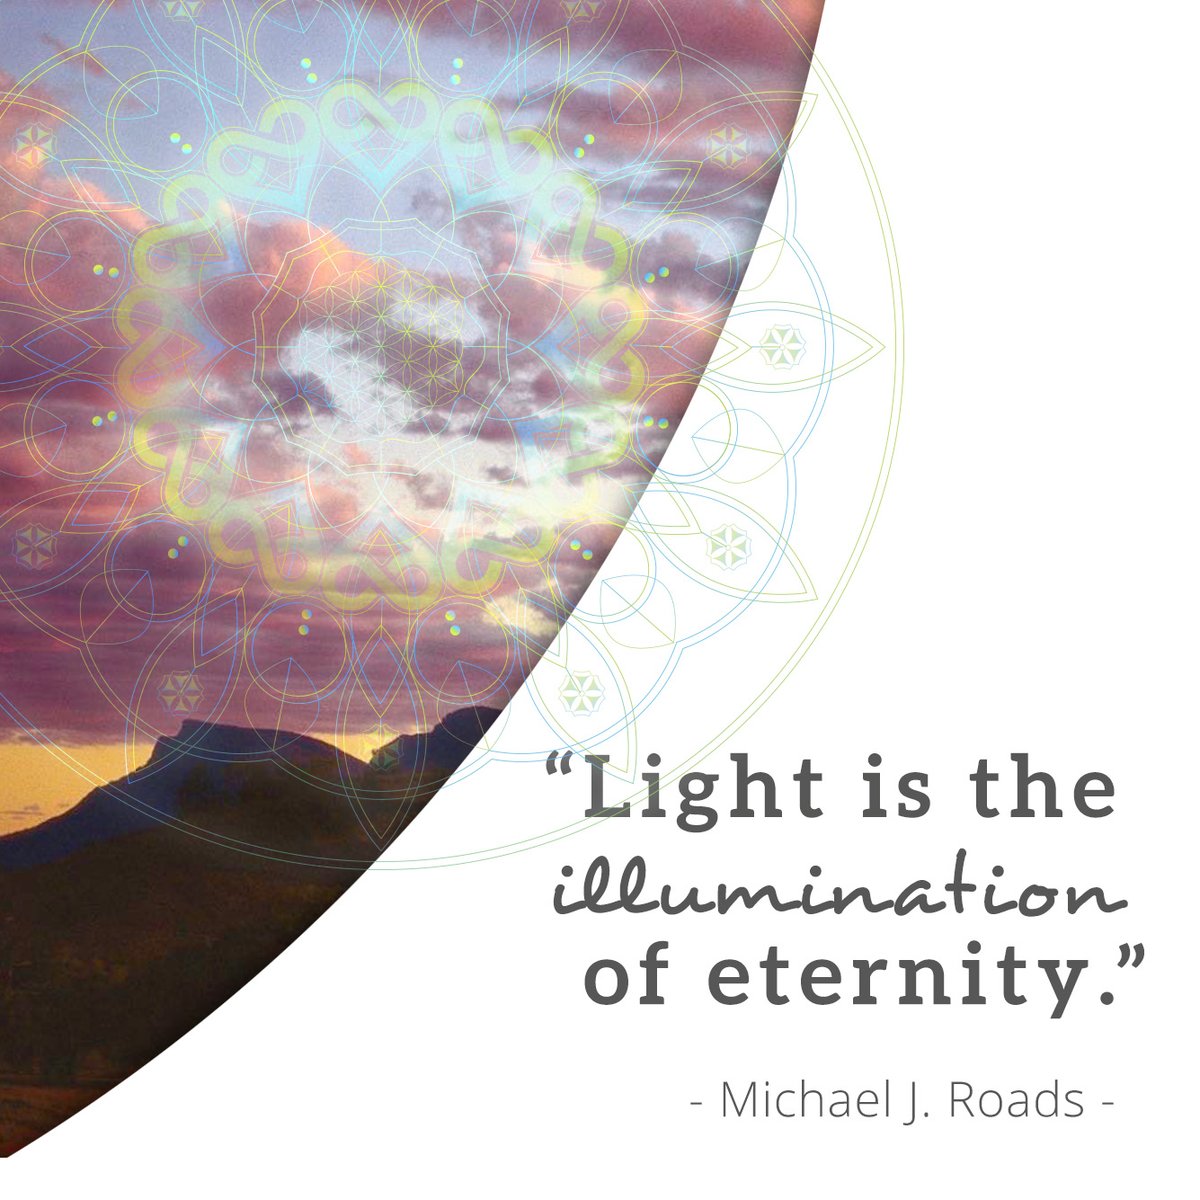 'Light is the illumination of eternity'

#consciousness #enlightenment #lovequotes #spirituality #spiritual #spiritualbeing #spiritualquotes #spiritualenlightenment #spiritualrevolution